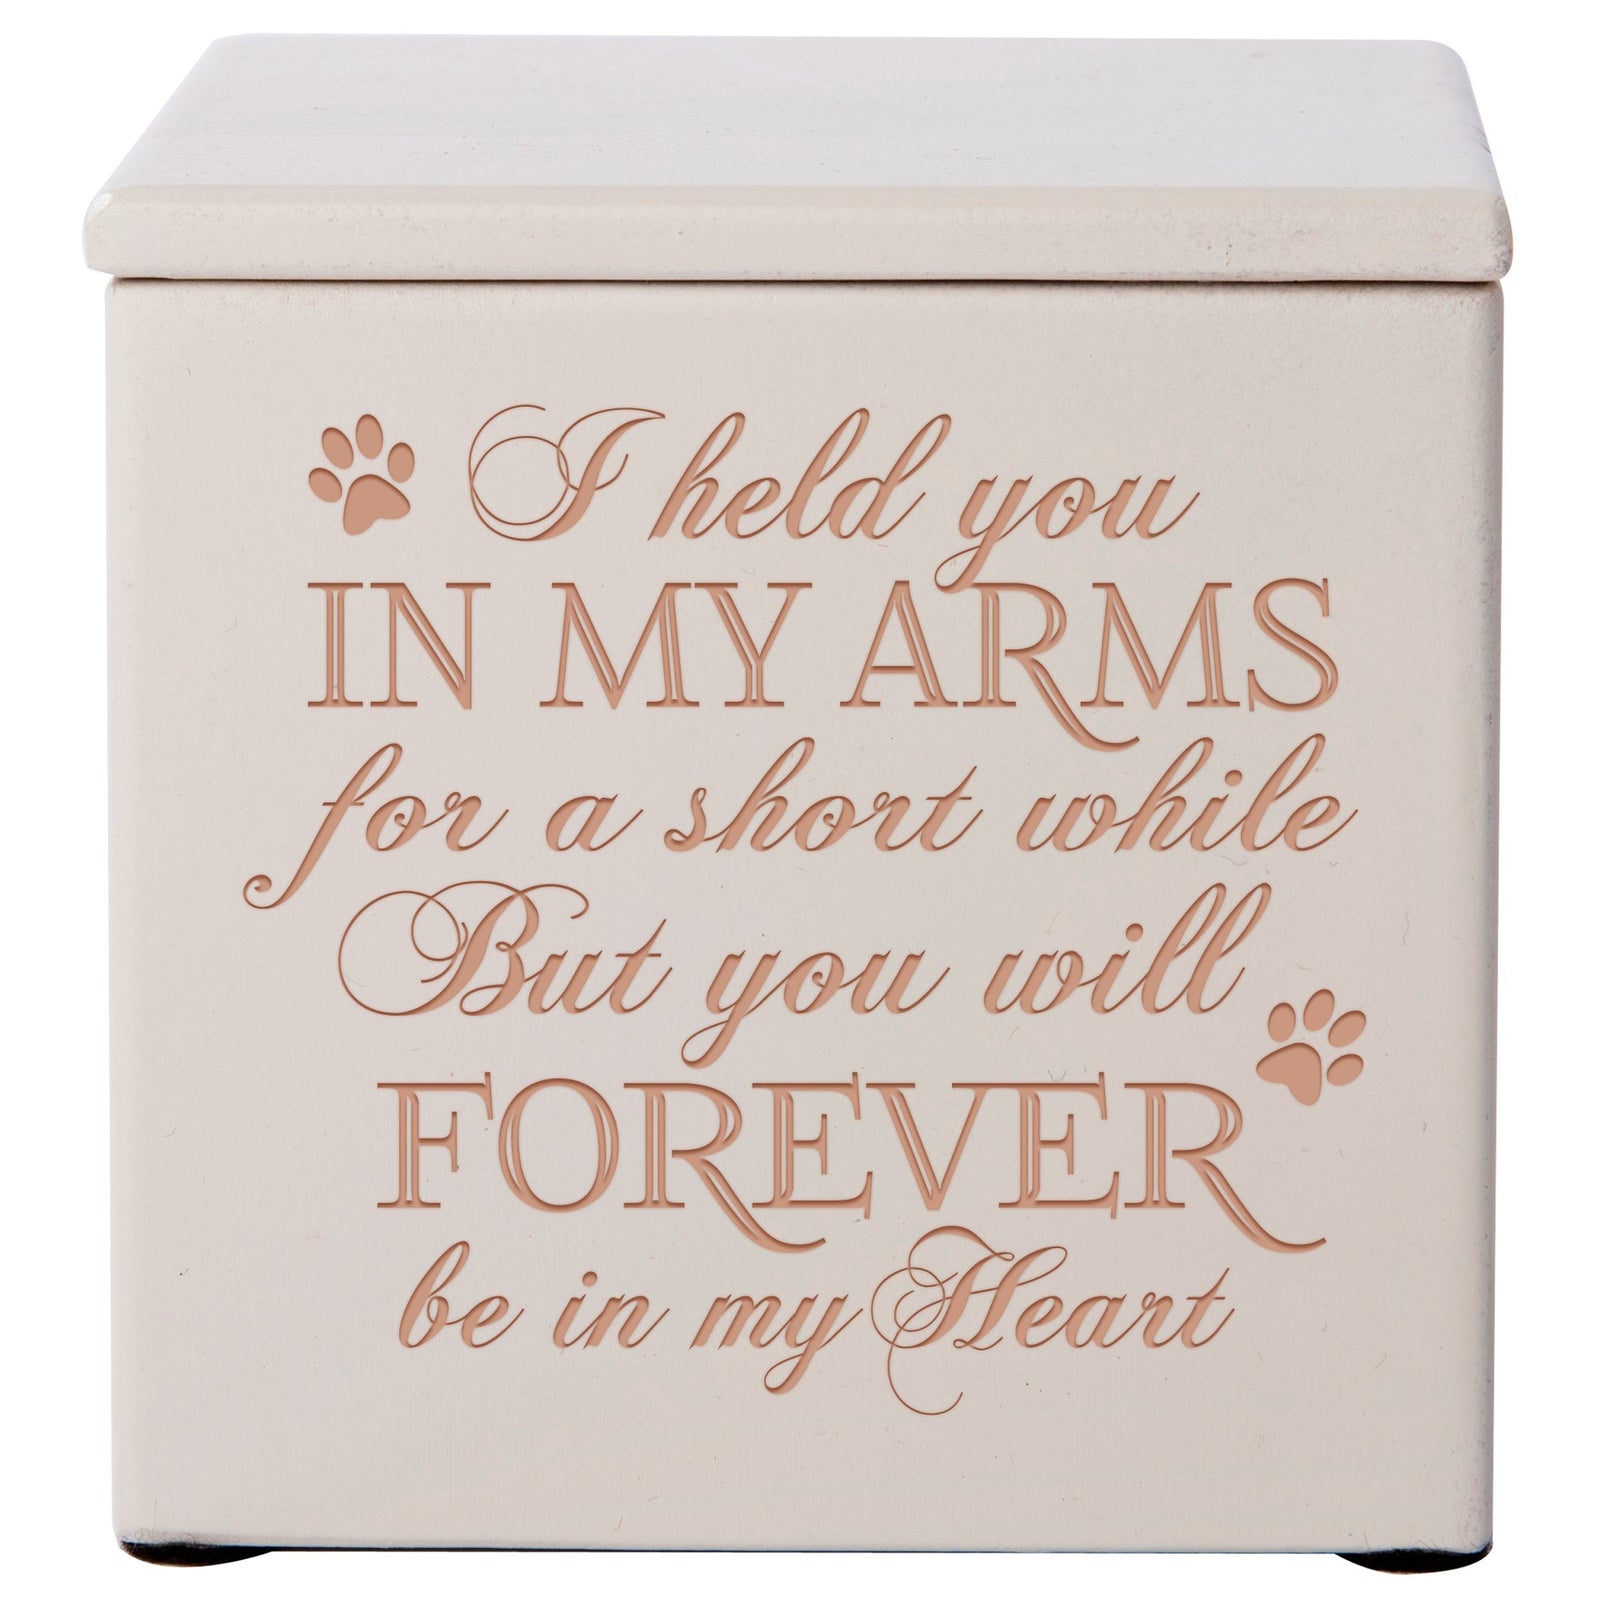 Ivory Pet Memorial 3.5x3.5 Keepsake Urn with phrase "I Held You In My Arms"